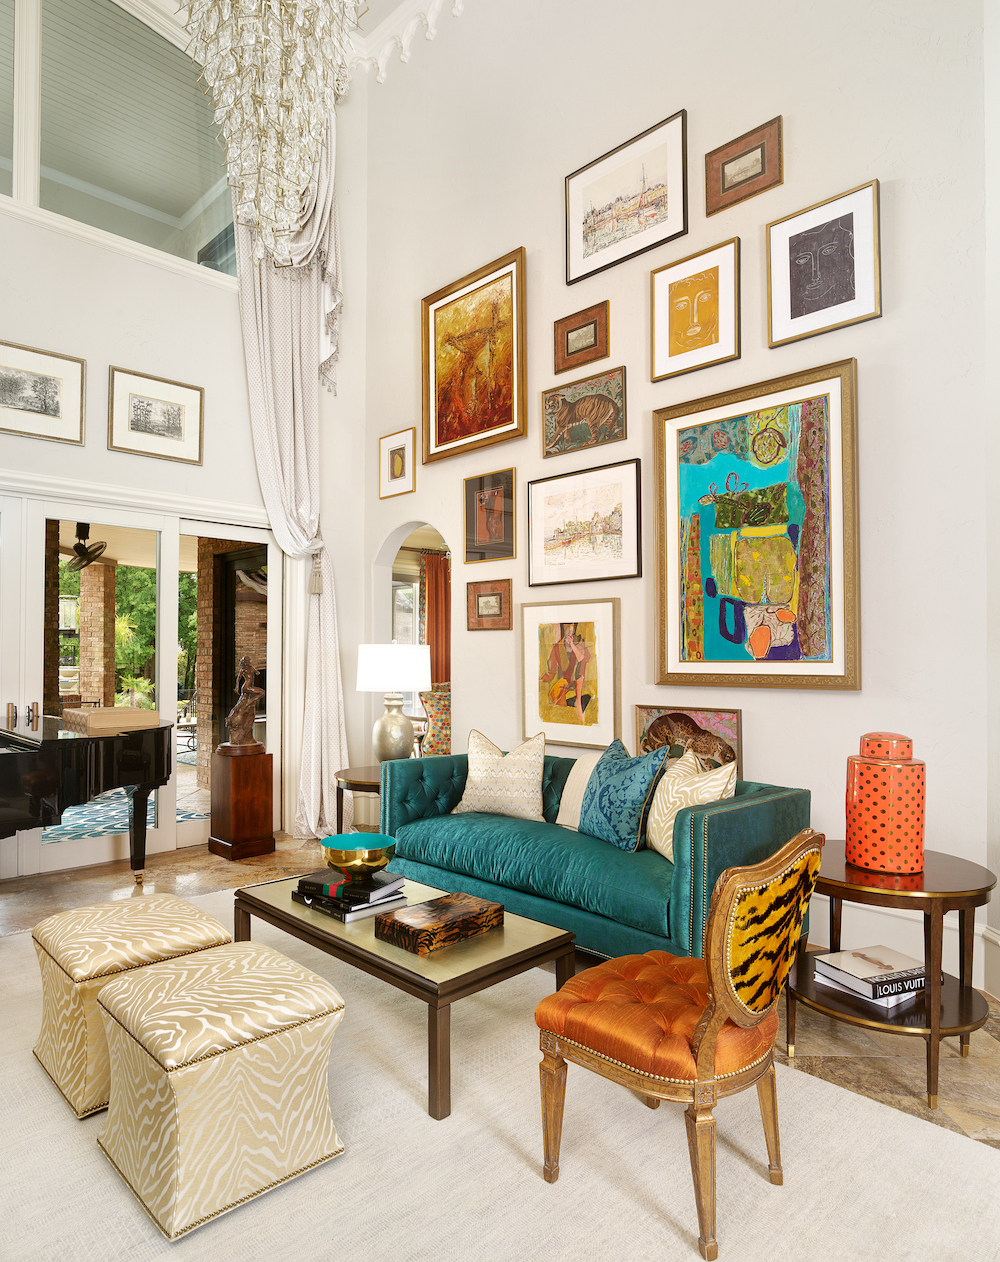 Blue, orange, and white colored art gallery wall above turquoise sofa